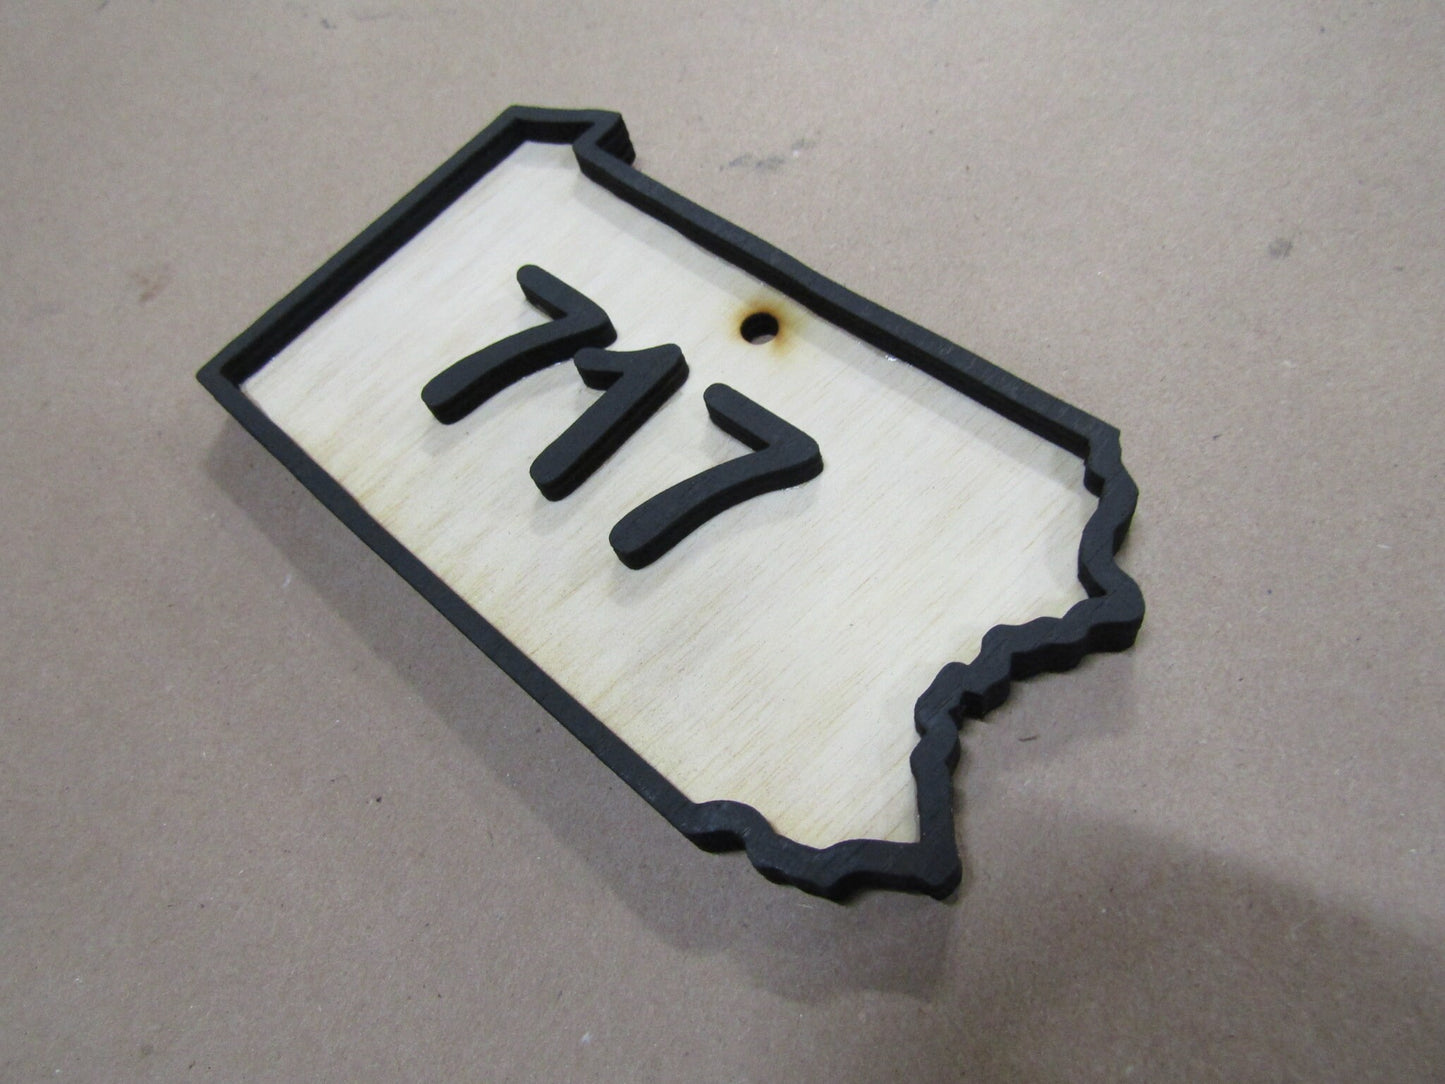 Custom State Raised Area Code Raised Sign Pennsylvania 717 3D Wood Your Words Custom Wooden Words Laser Cut Out Wood Cut Out Home Couples